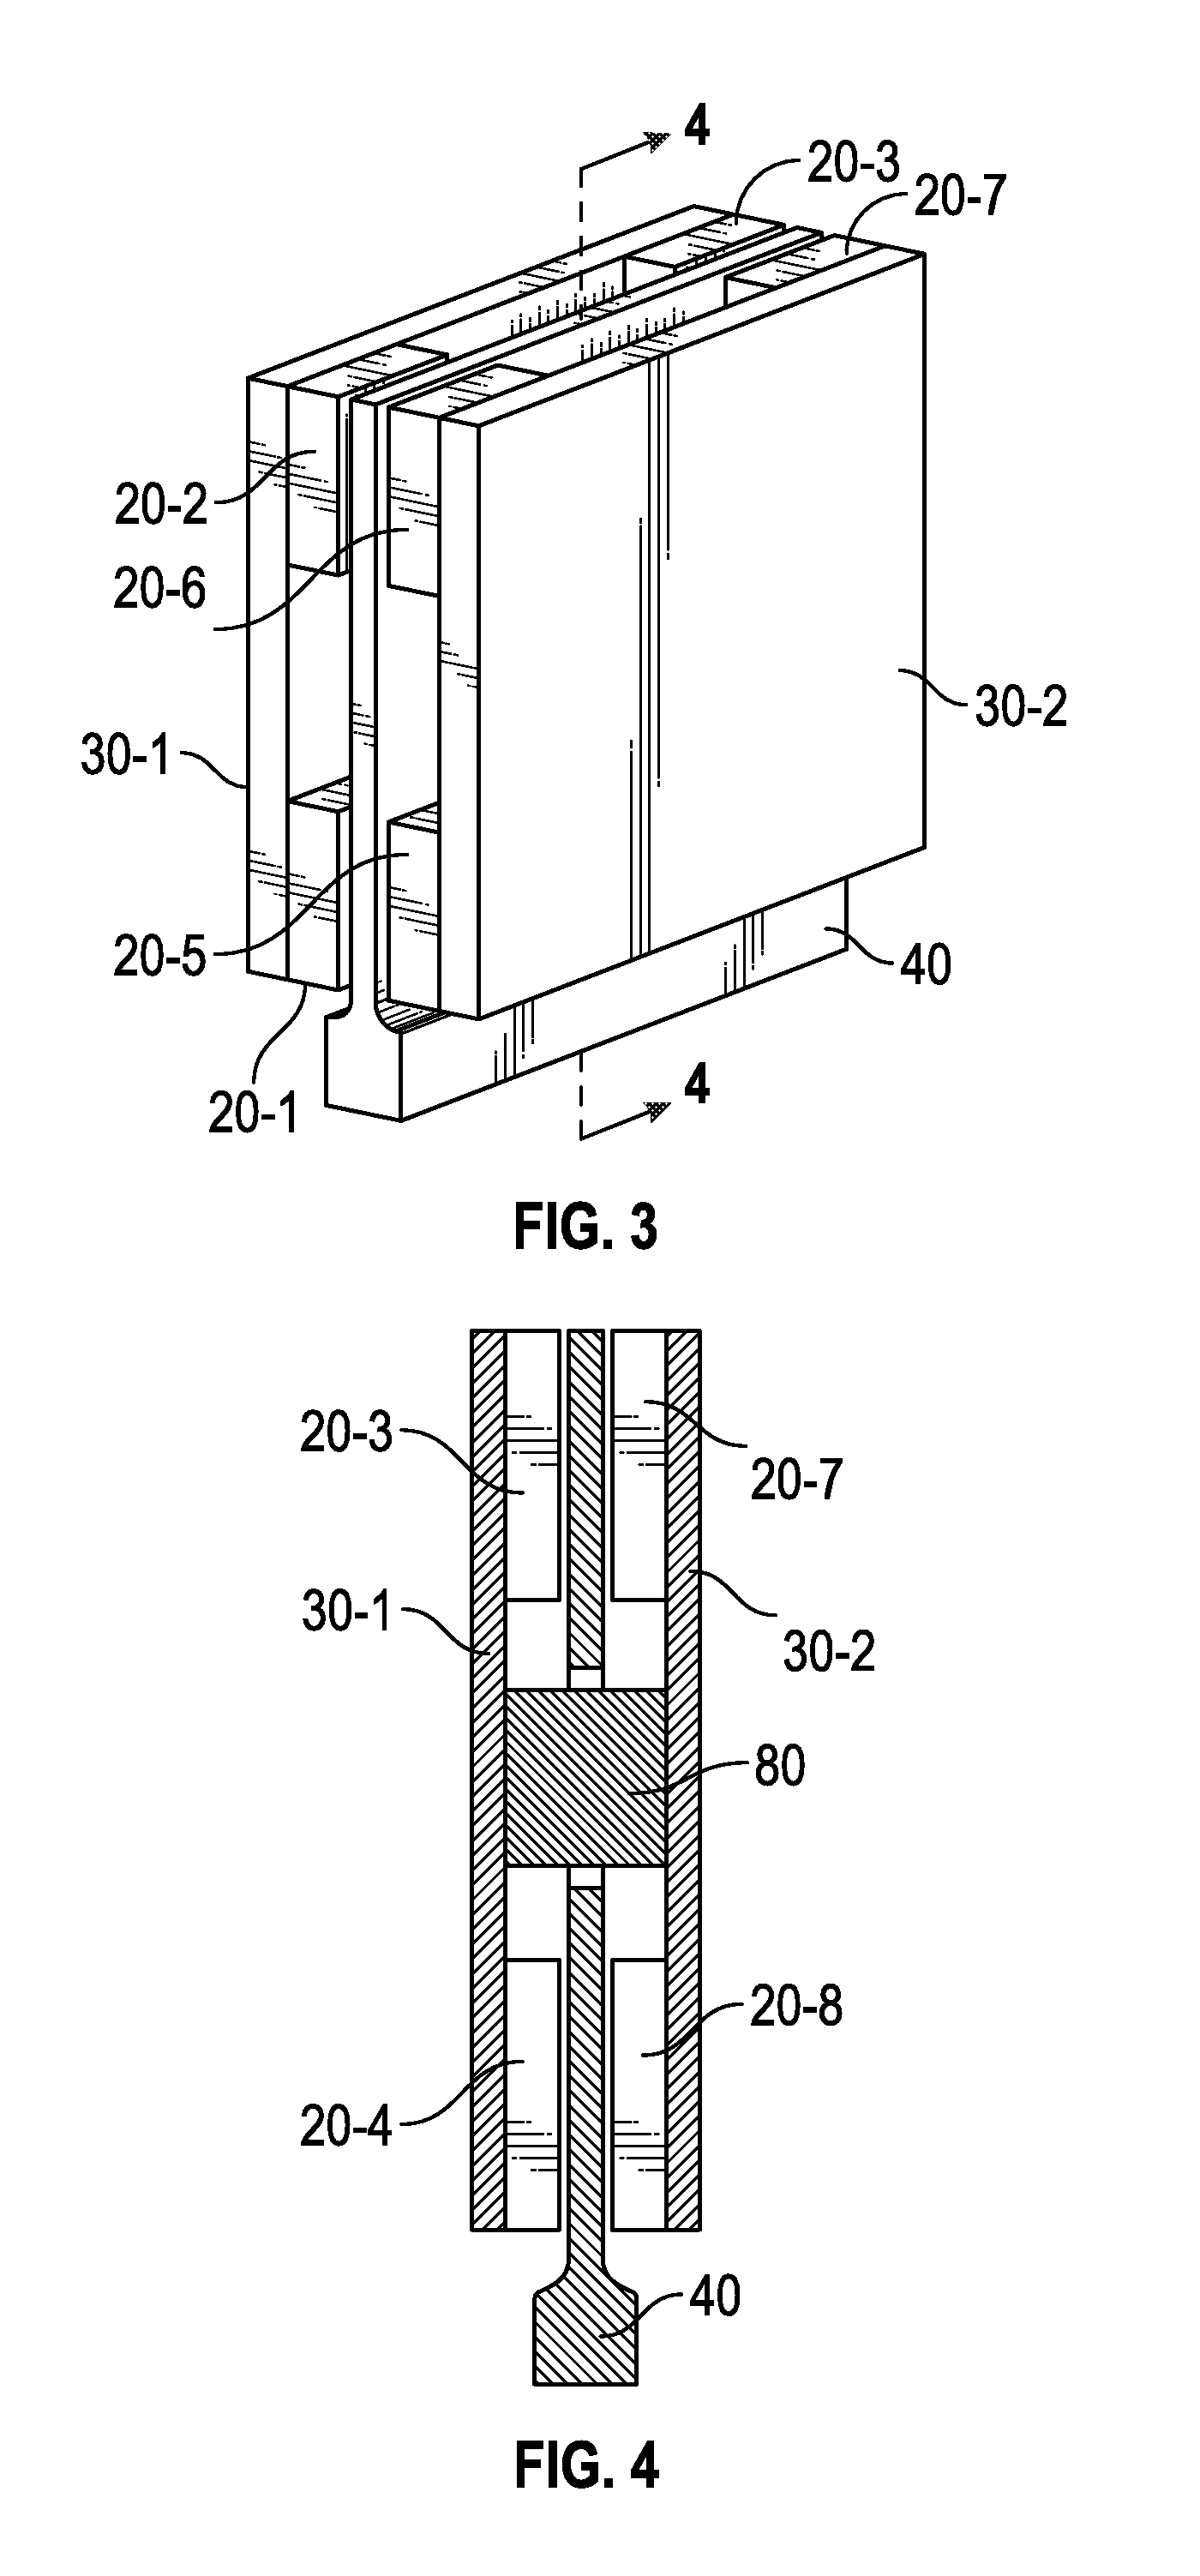 Magnetically damped isolator and pointing mount